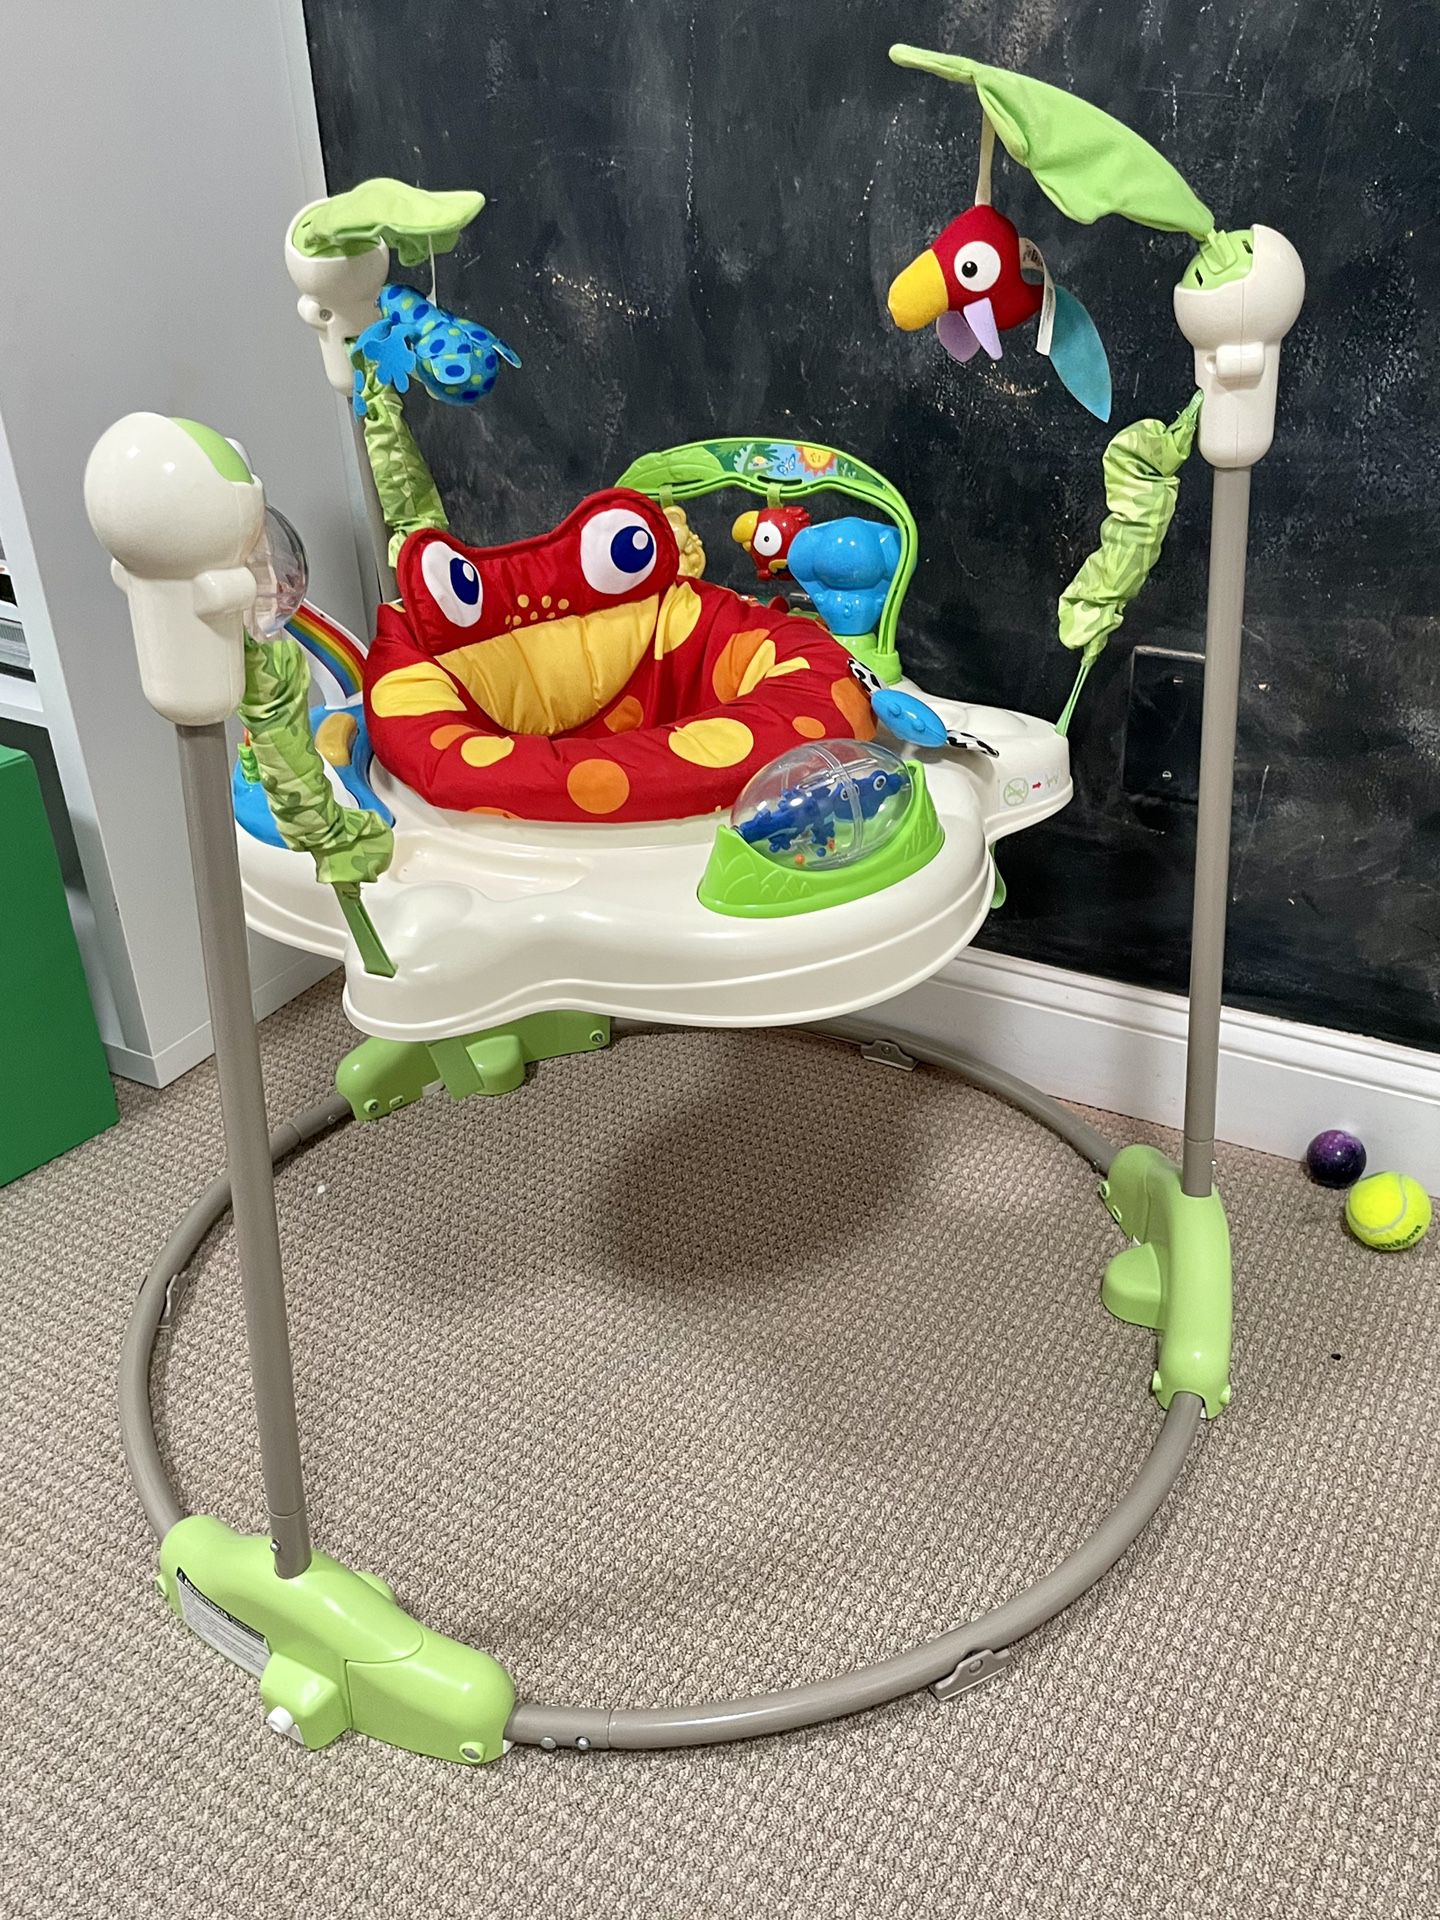 Fisher-Price Rainforest Jumperoo, freestanding baby activity center with lights, music, and toys